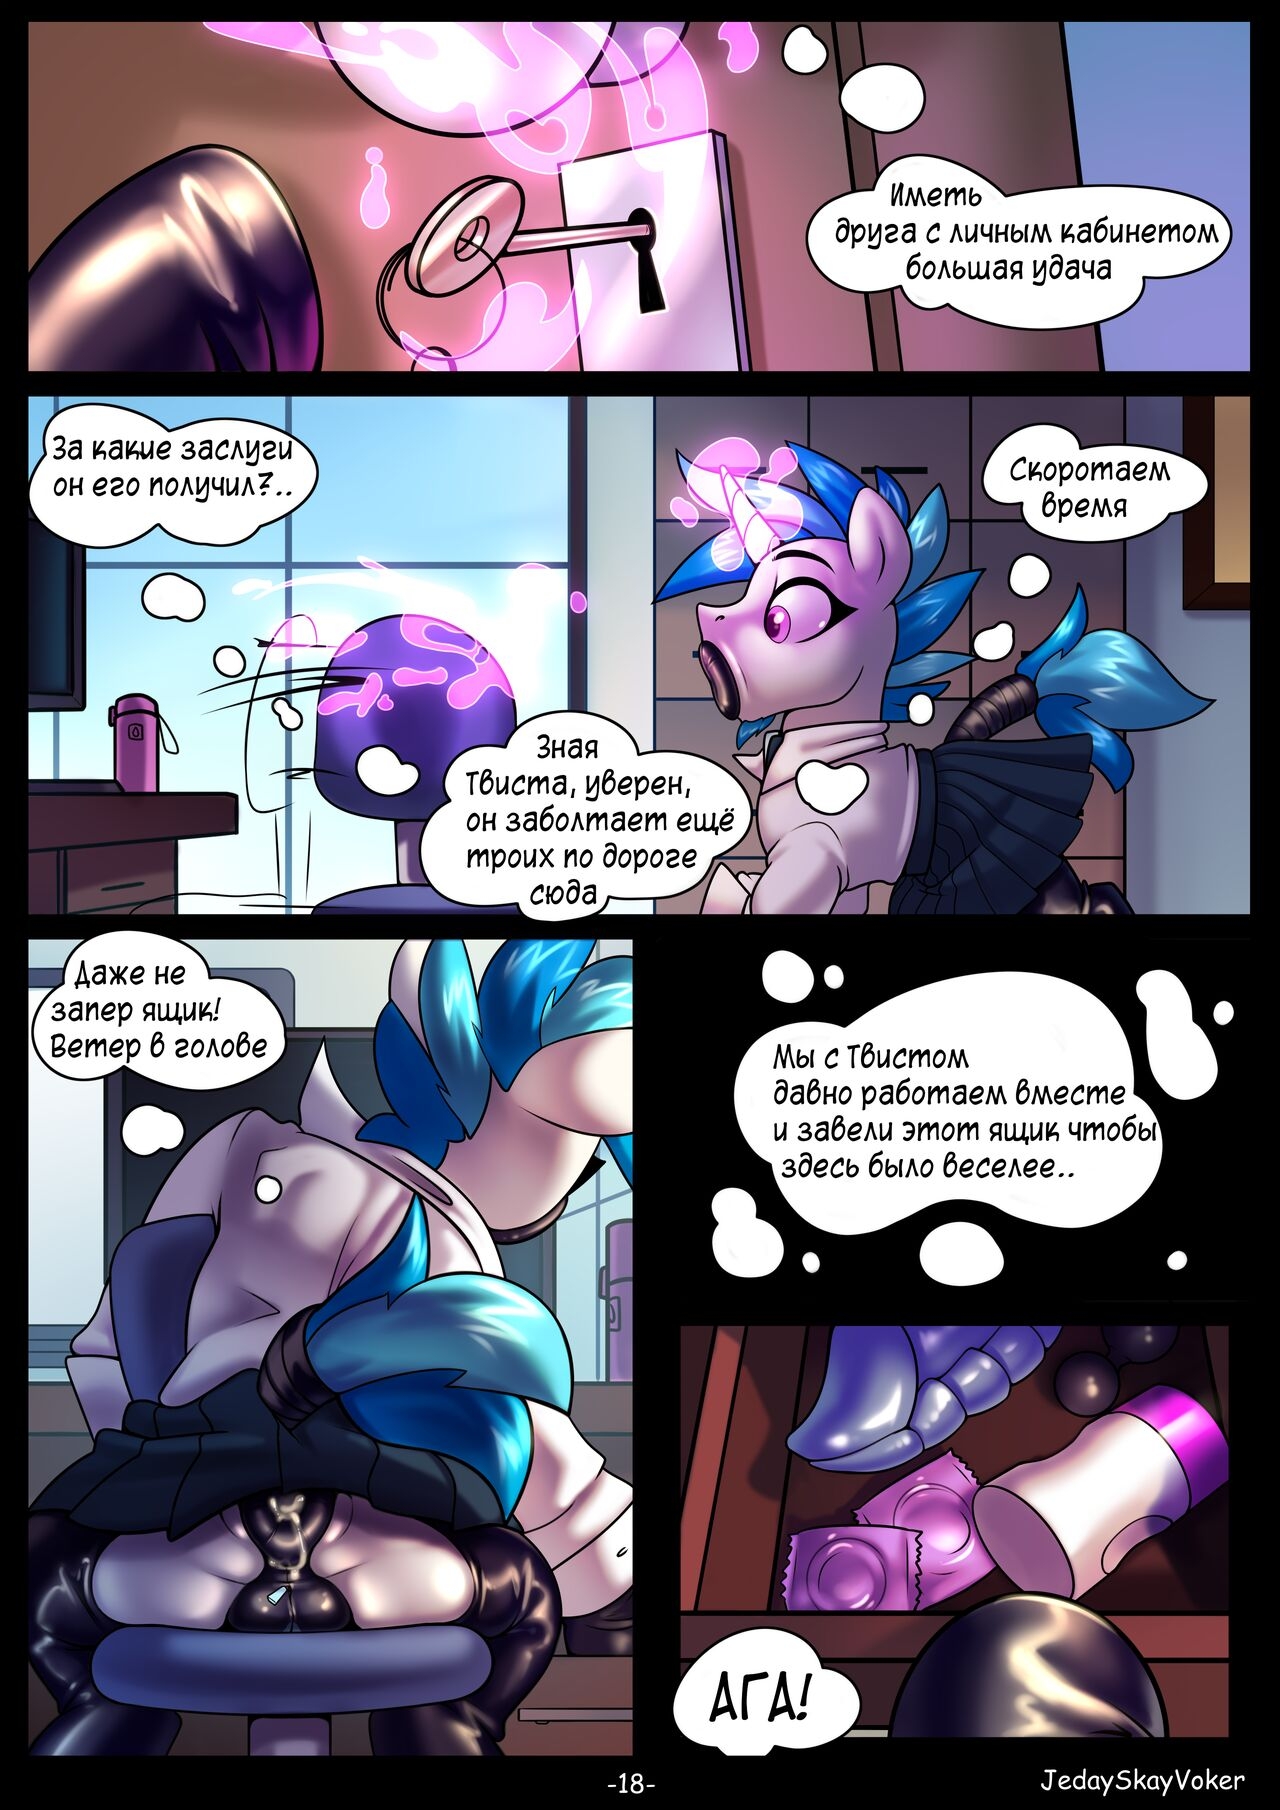 [JedaySkayVoker] Play the Record, ch. 1-3 (My Little Pony: Friendship is Magic) [+Sketches][Ongoing][Russian] 18